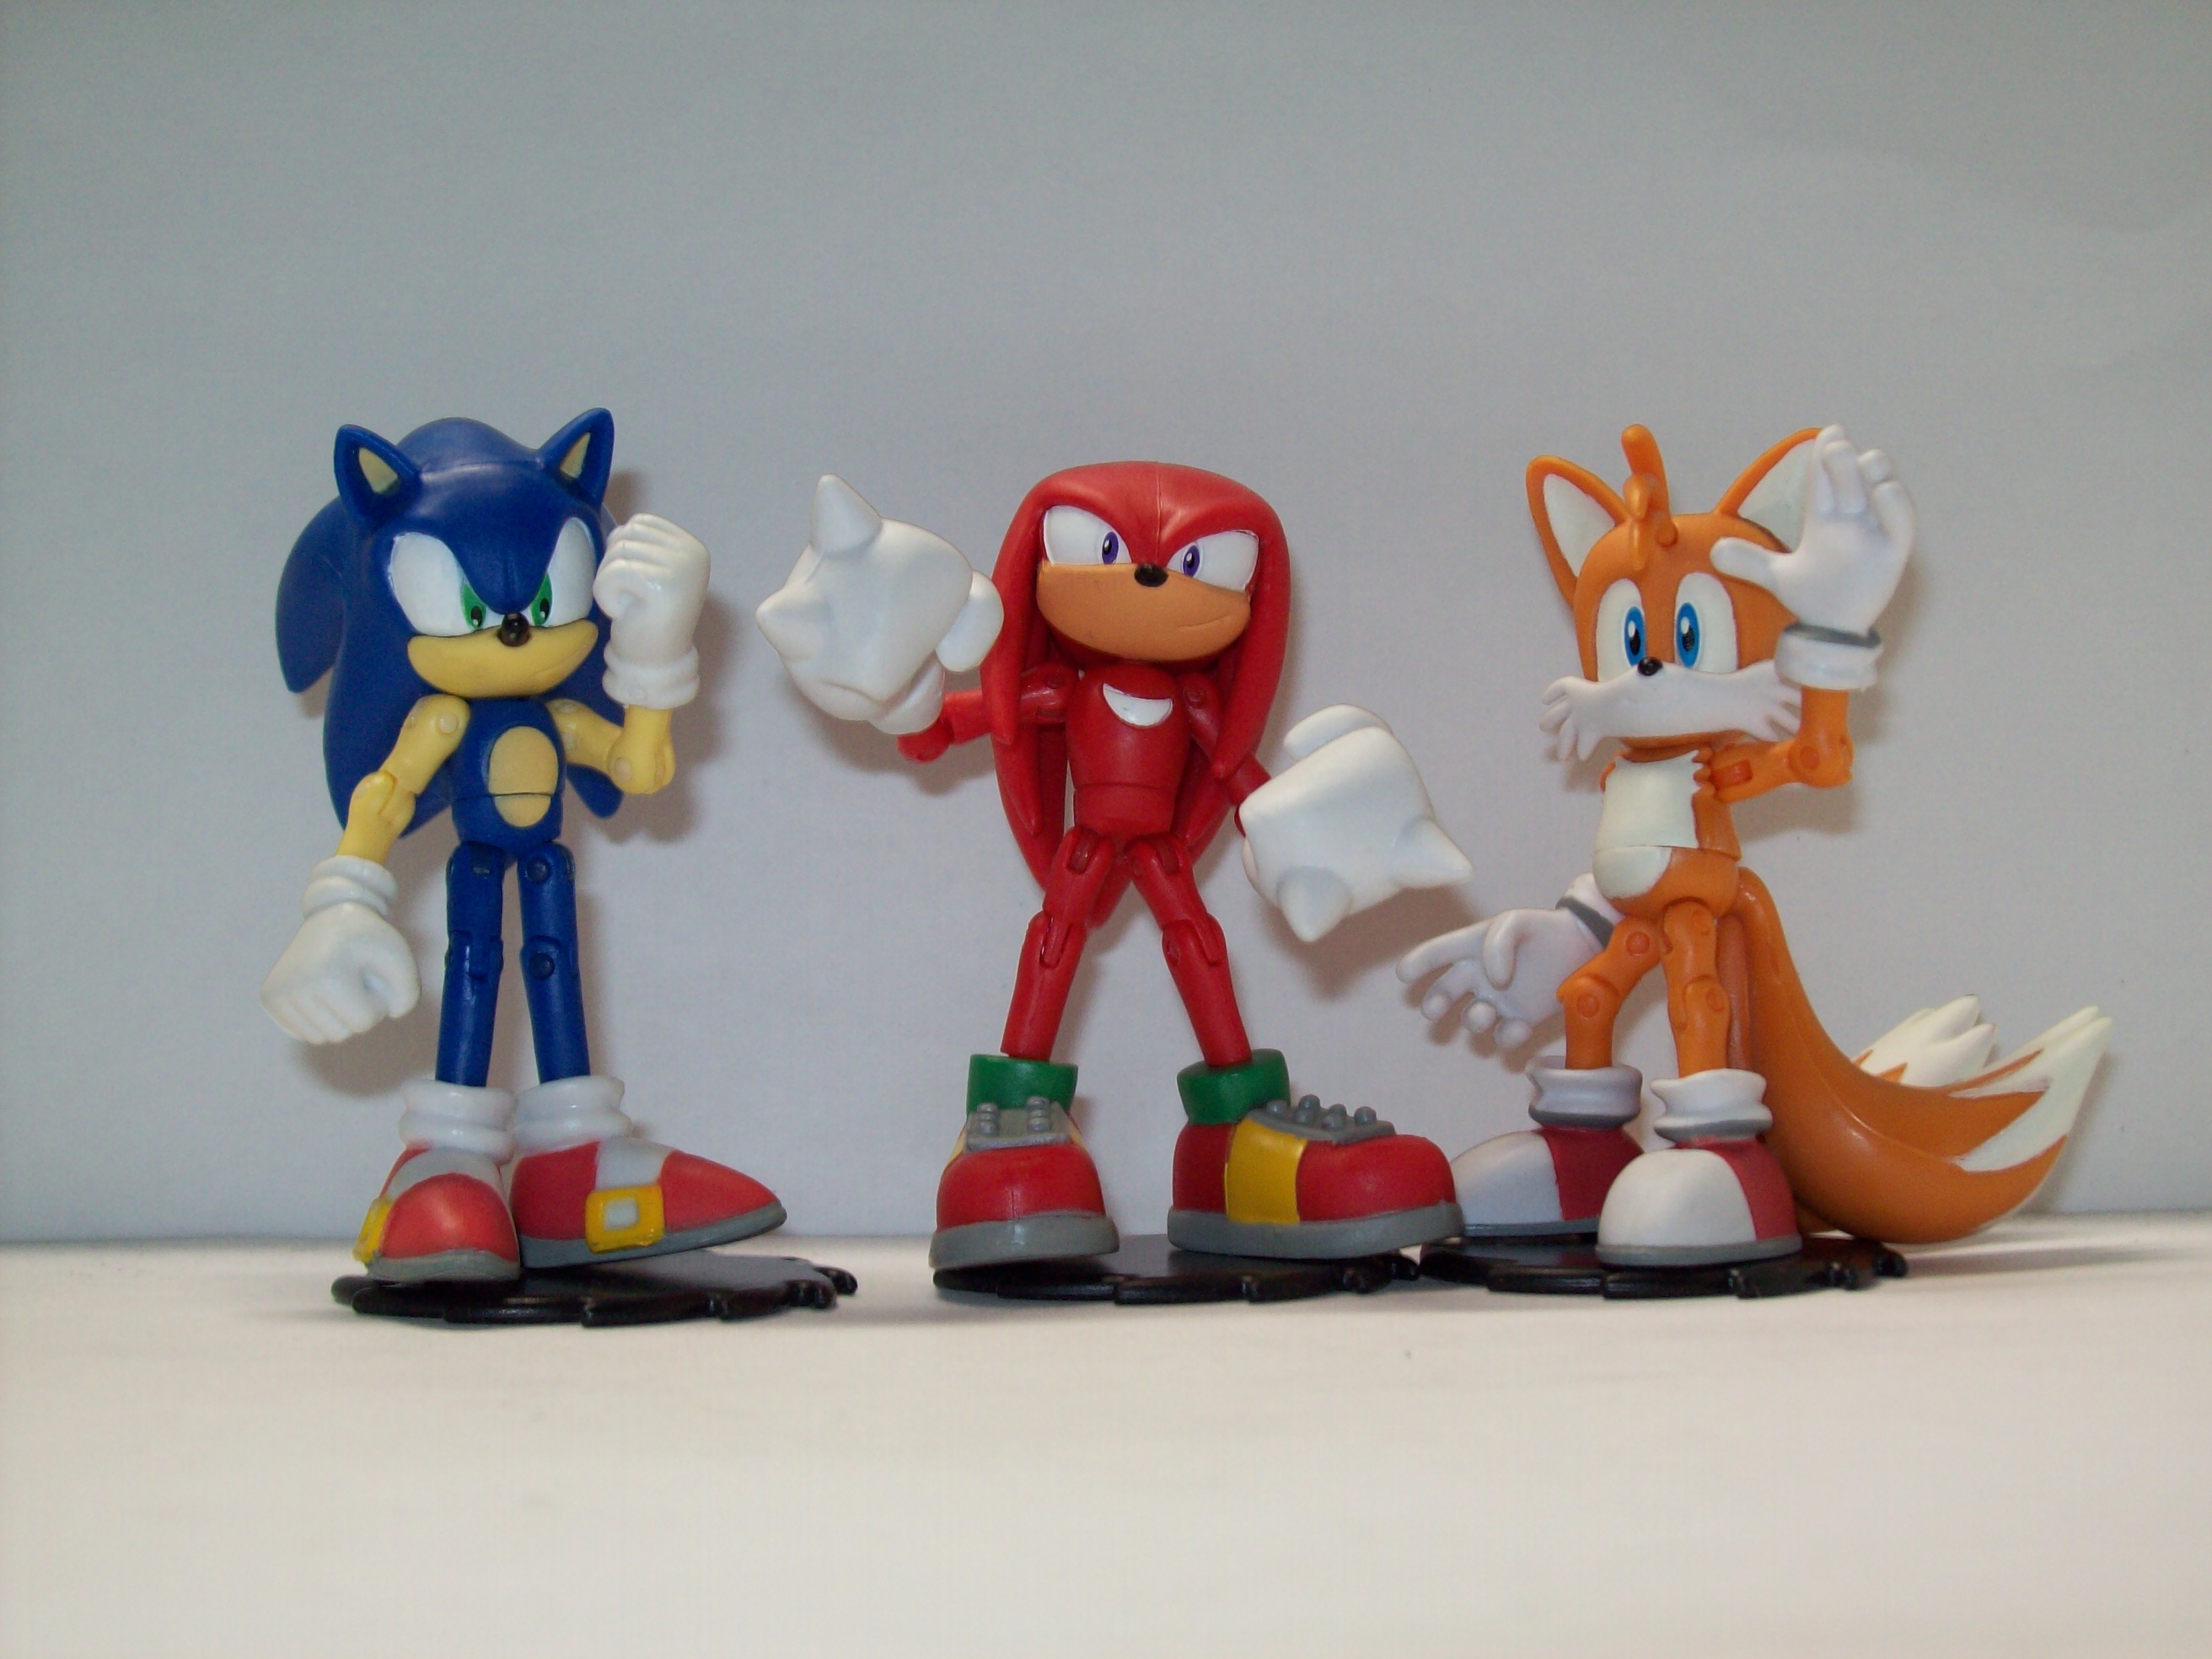 Sonic the Hedgehog Jazwares 3 inch figure Sonic,Tails and Knuckles Review By Jazwares ...3296 x 2472